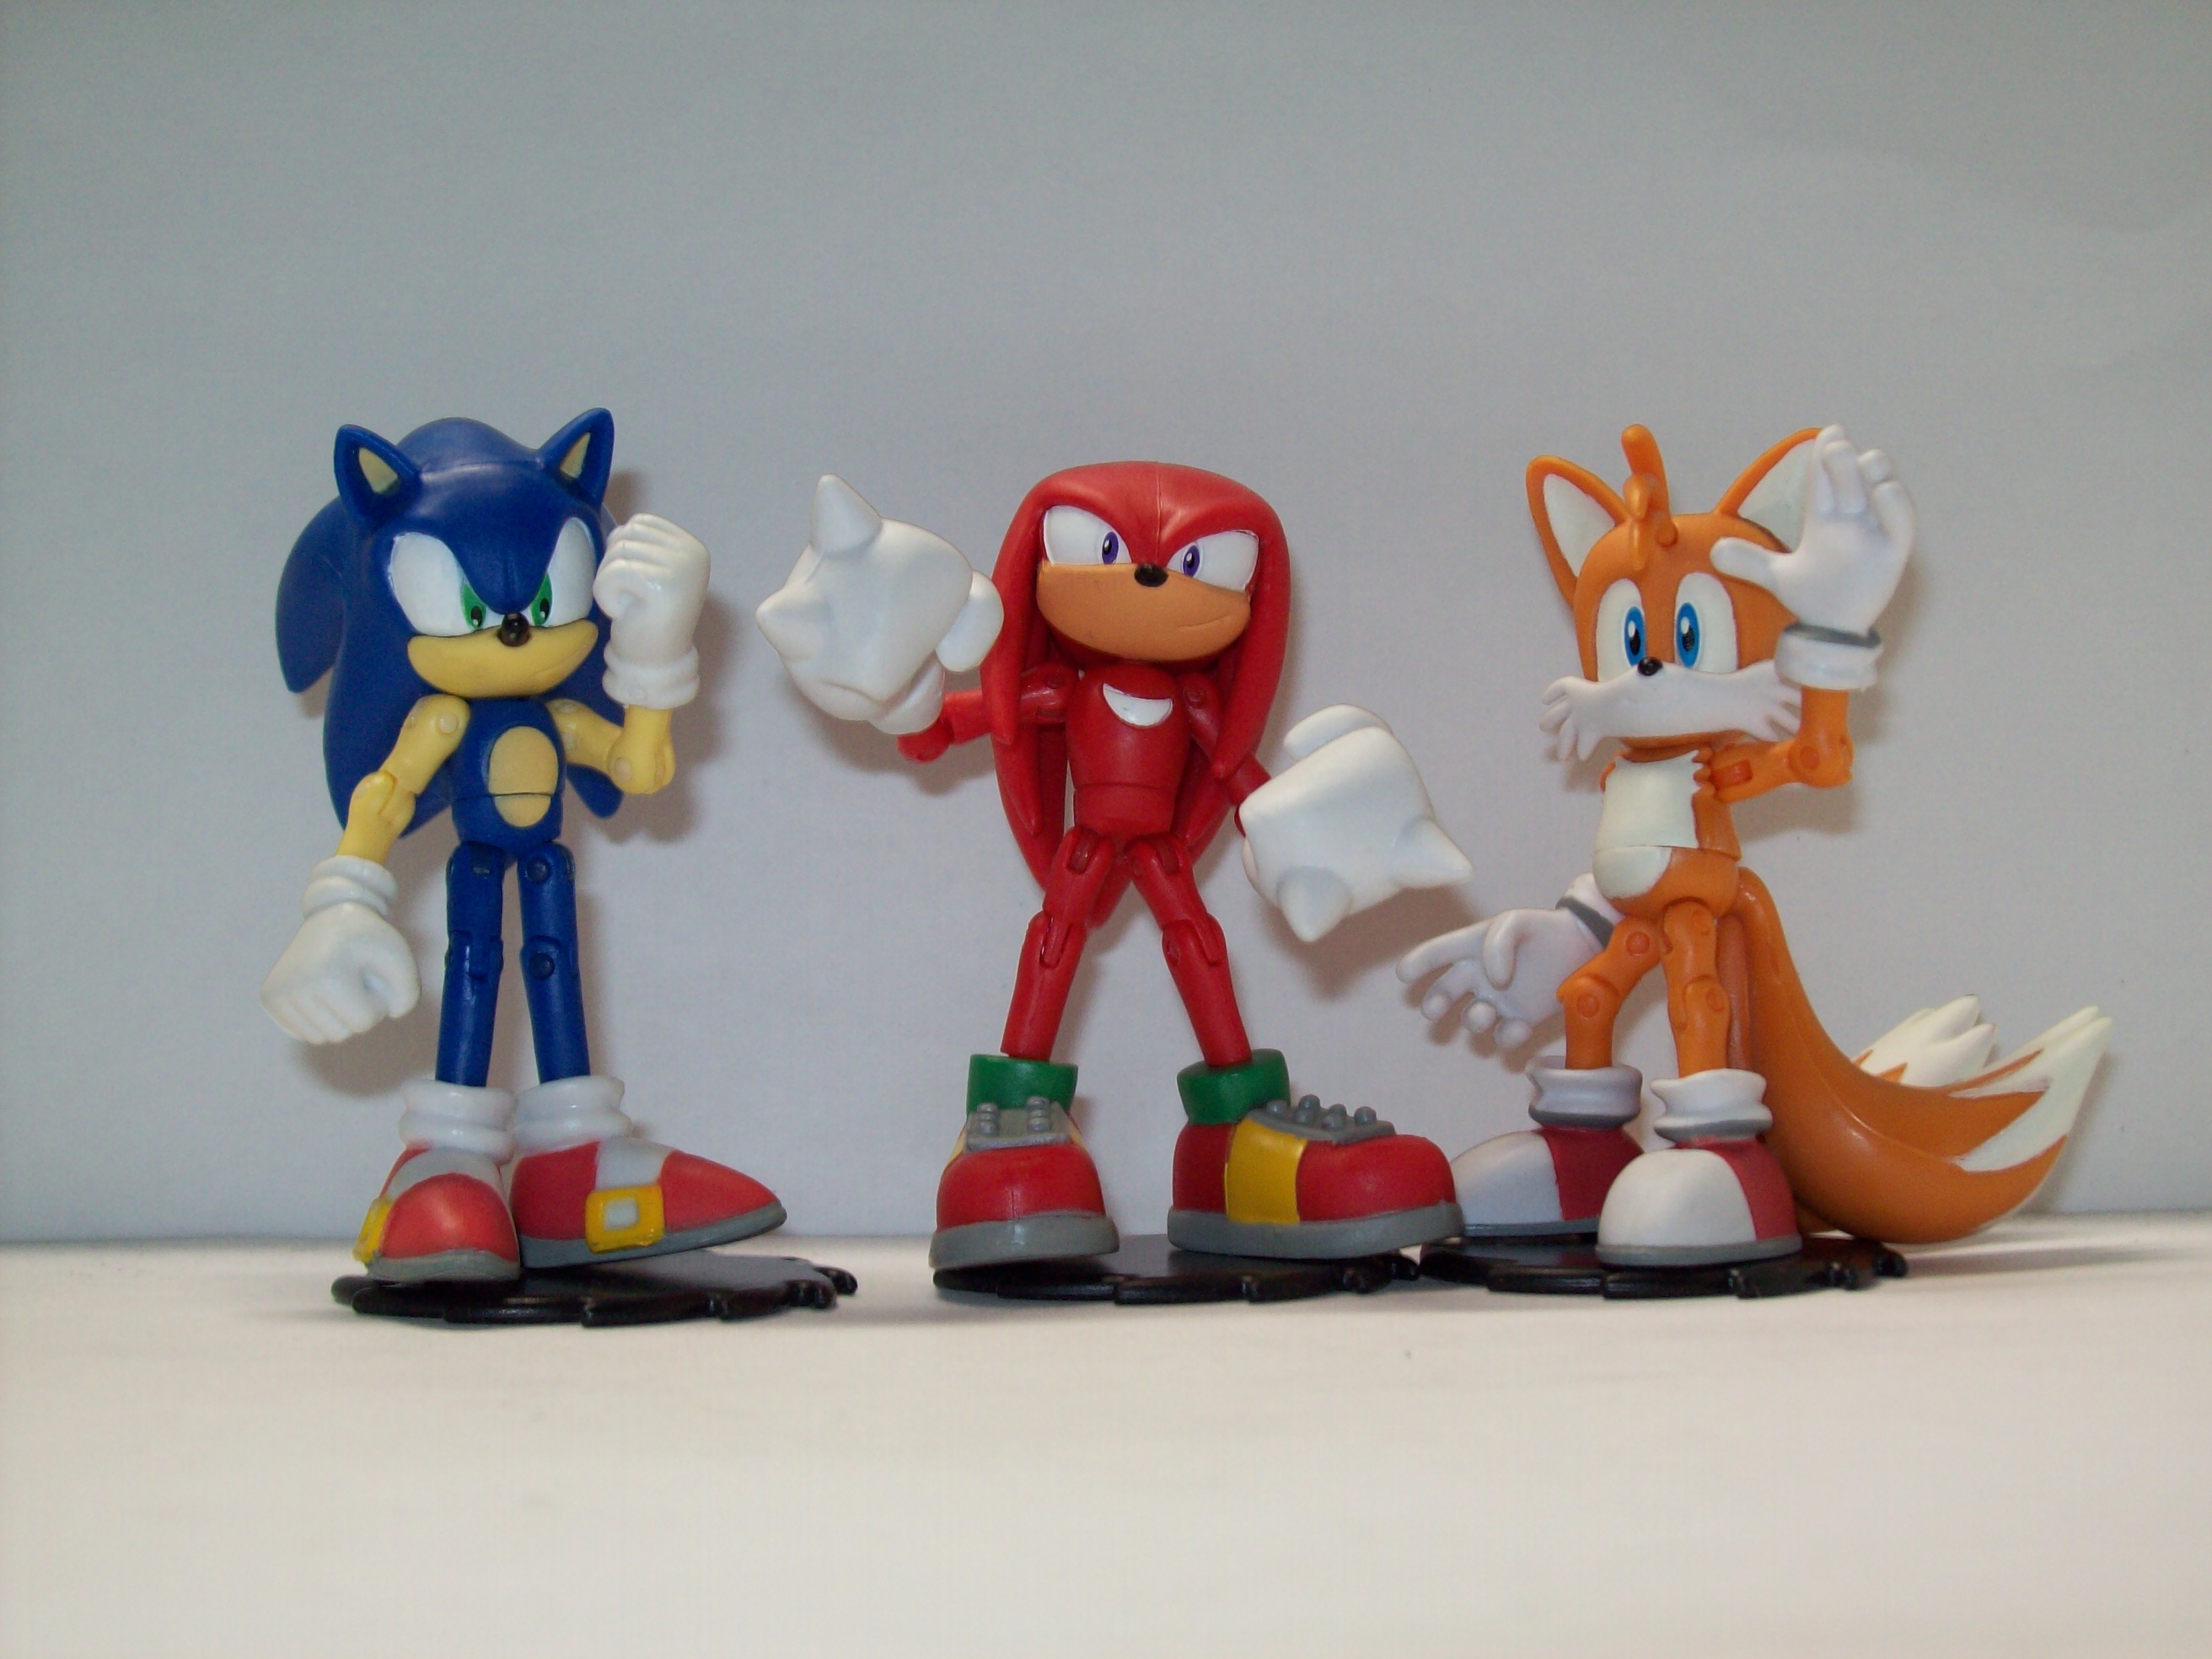 Sonic the Hedgehog Jazwares 3 inch figure Sonic,Tails and Knuckles Review By Jazwares ...3296 x 2472